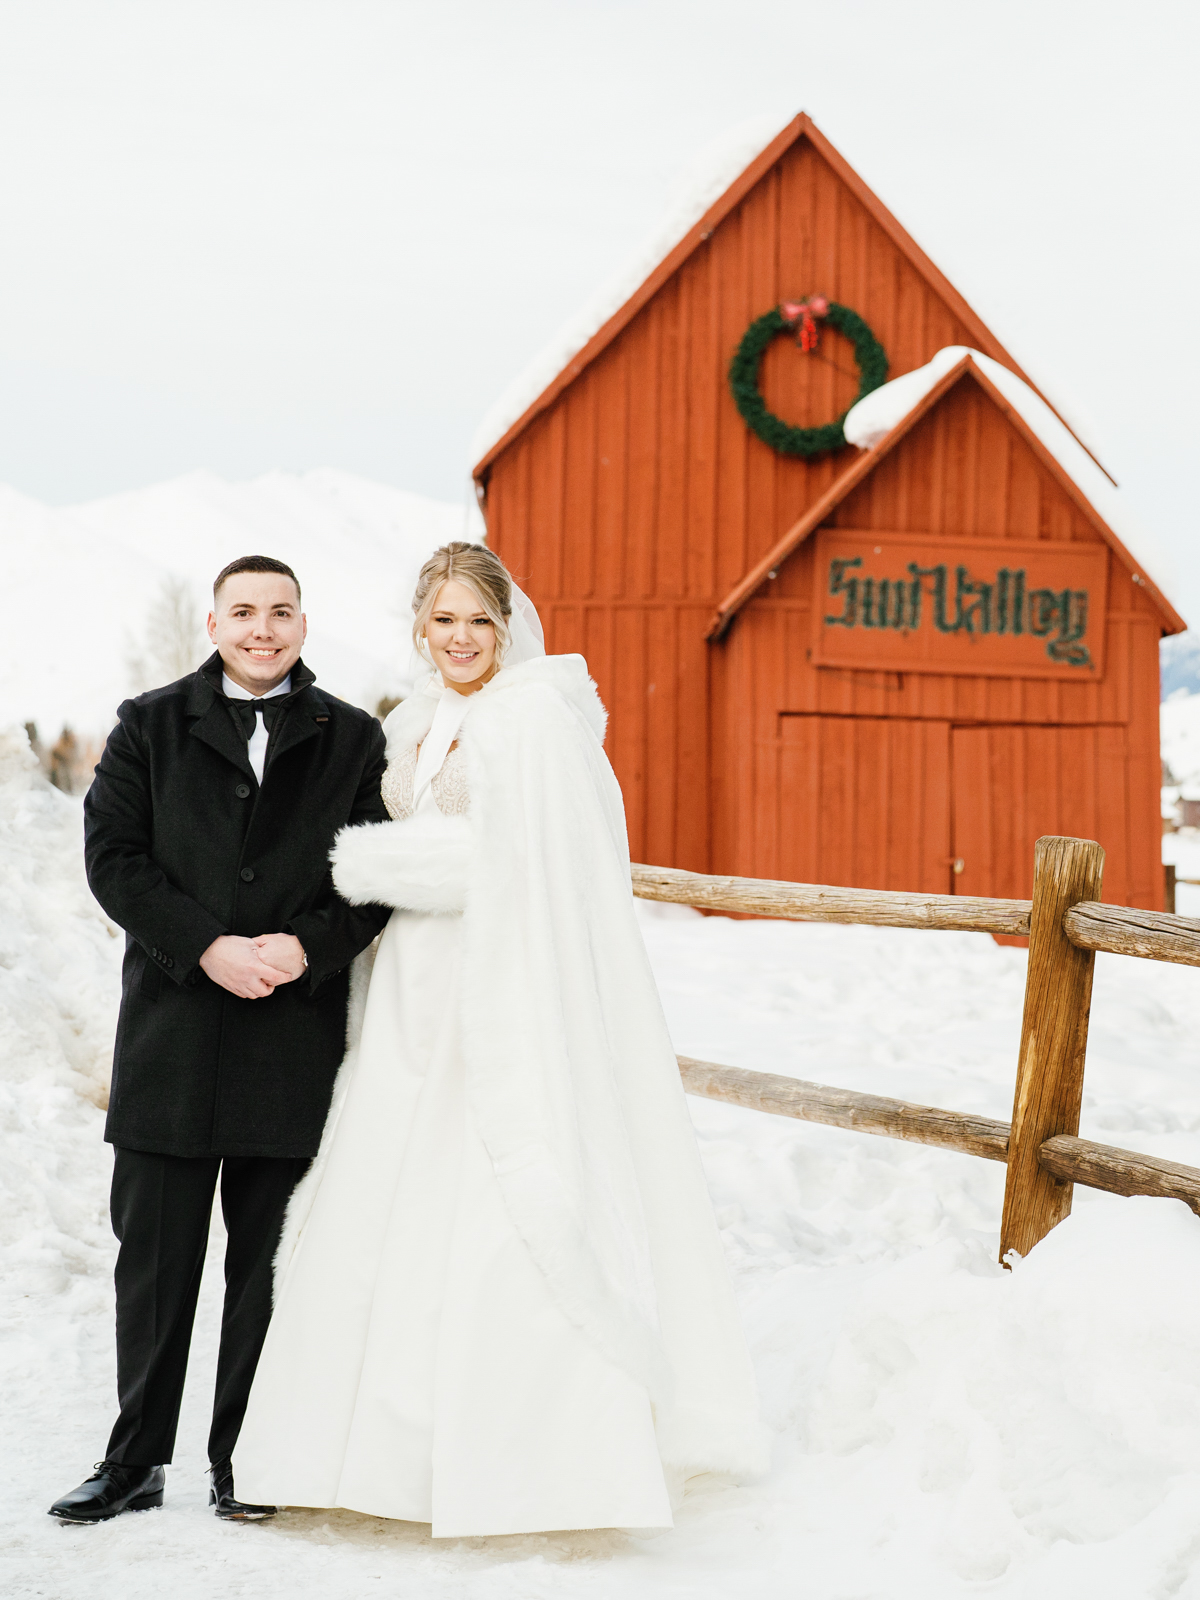 Newlyweds in a Winter Wonderland Sun Valley Wedding in front of the red barn.